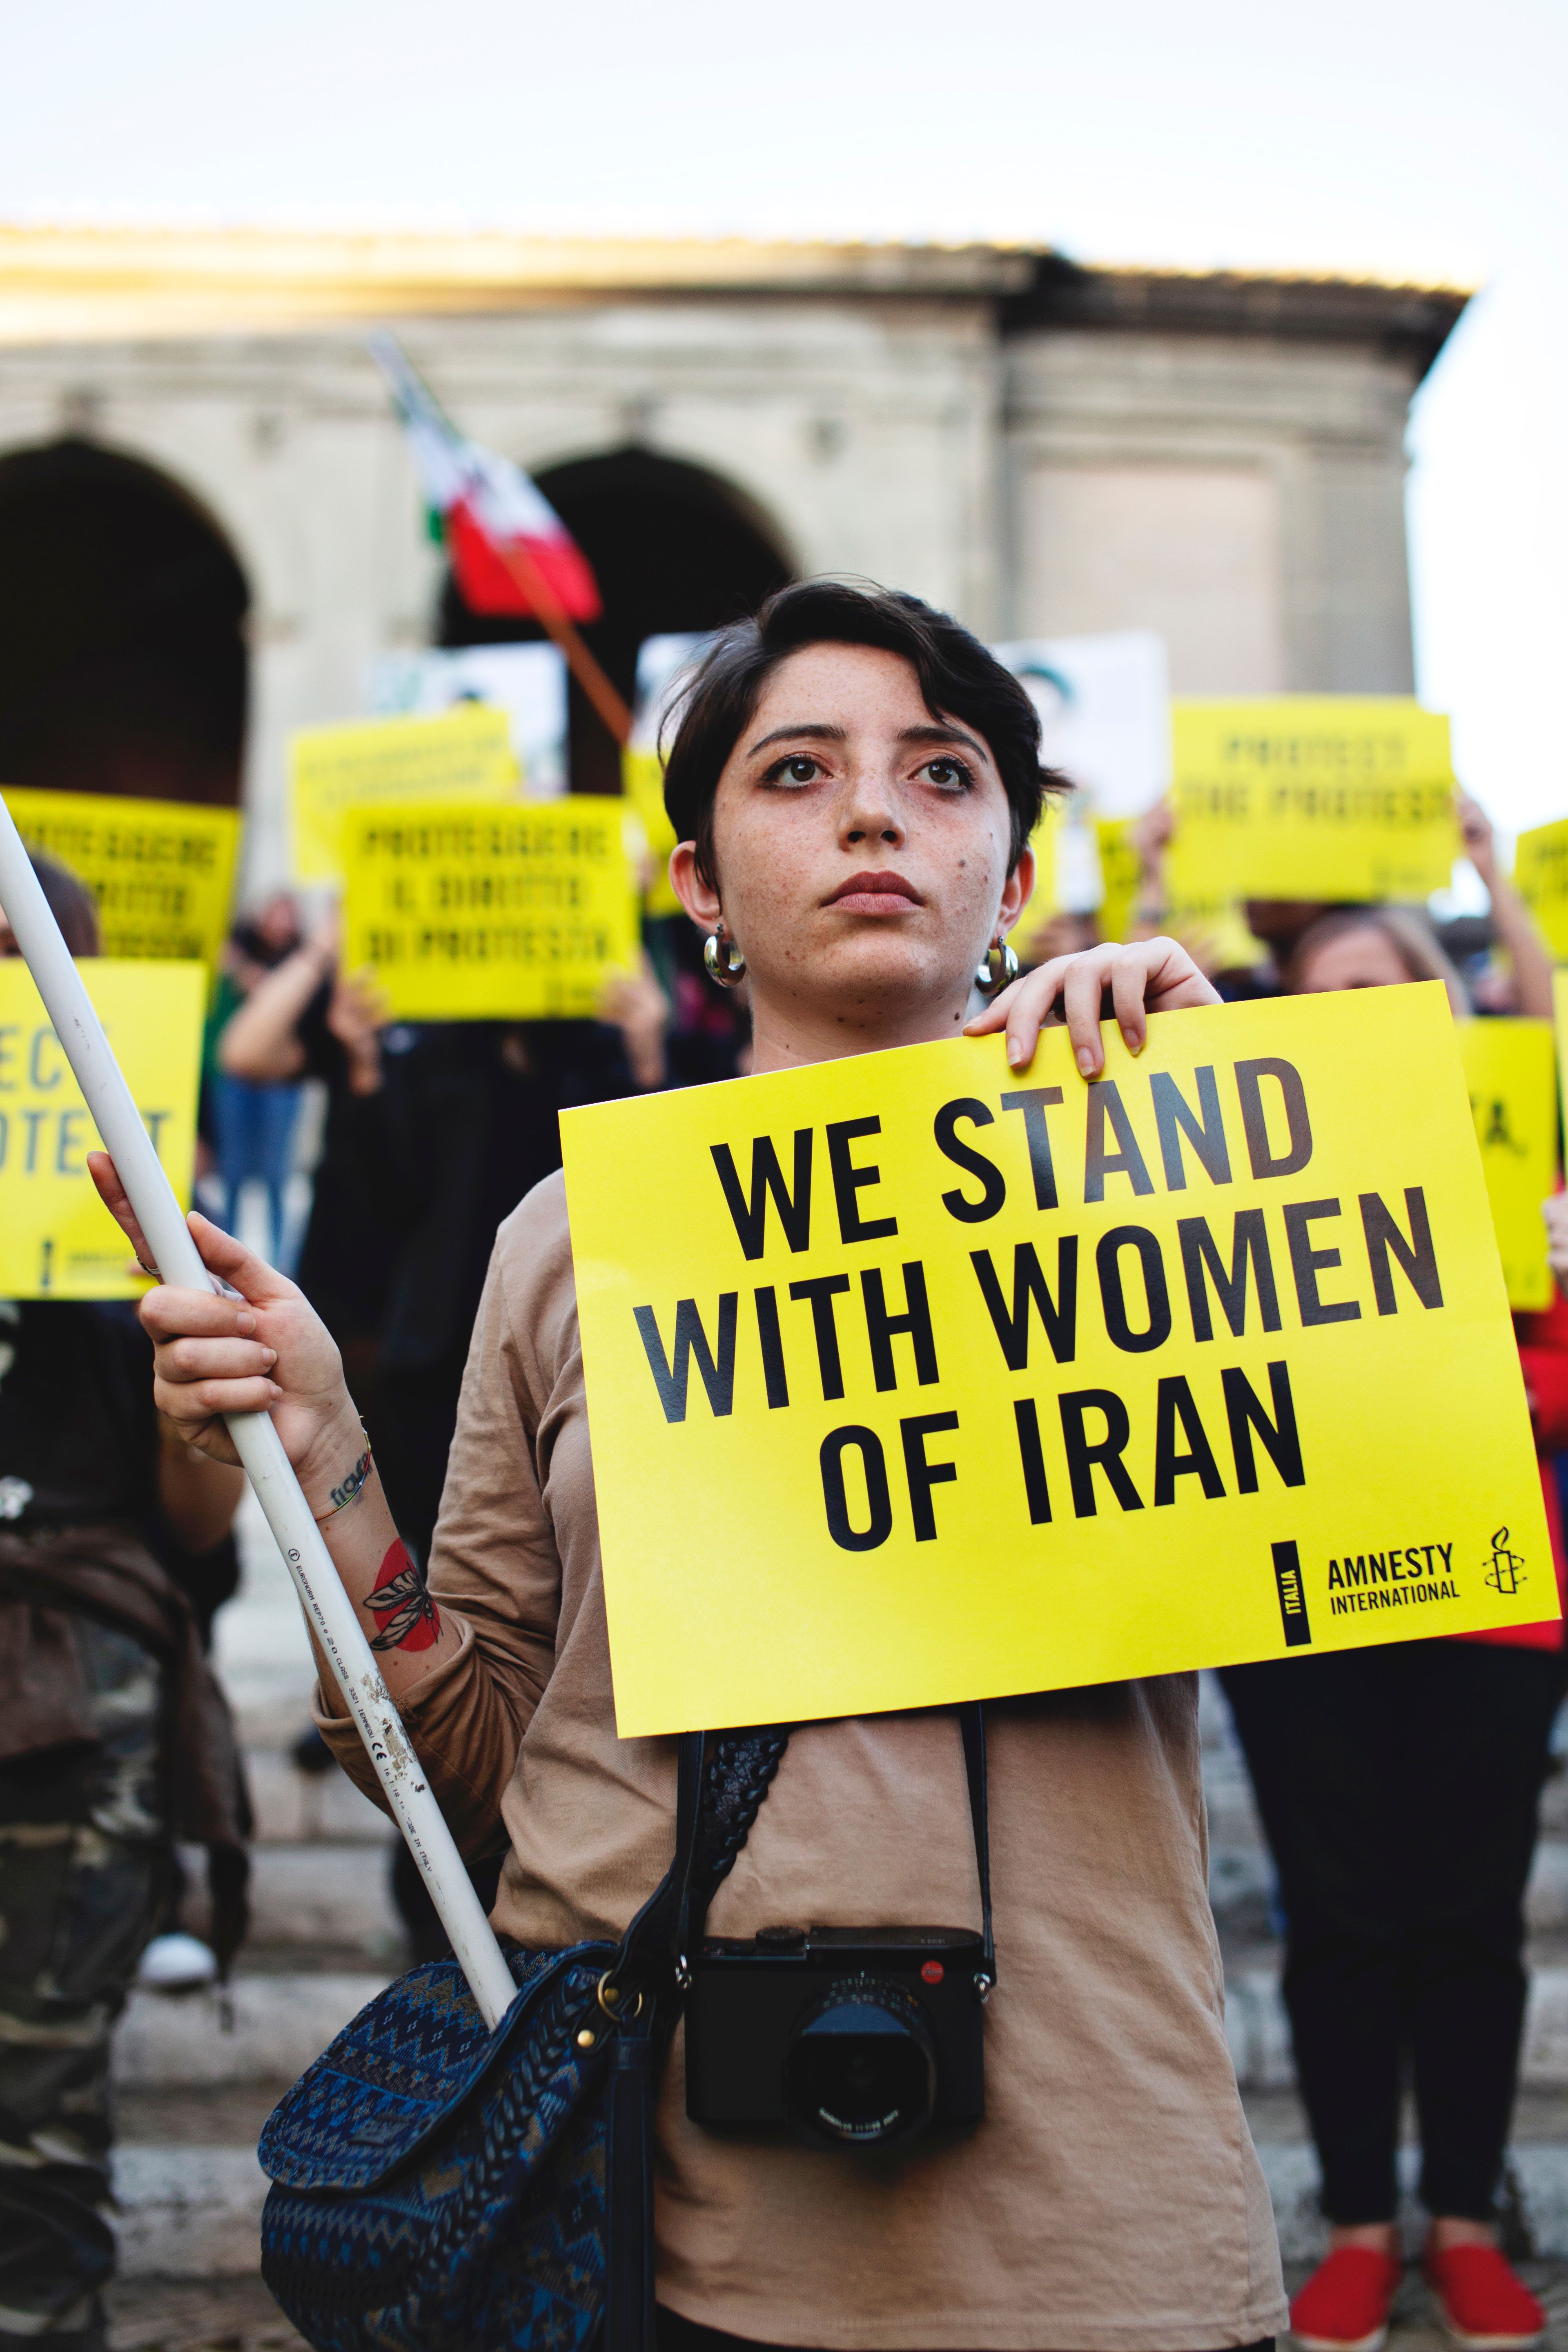 a woman holds a sign that says "we stand with women of iran"